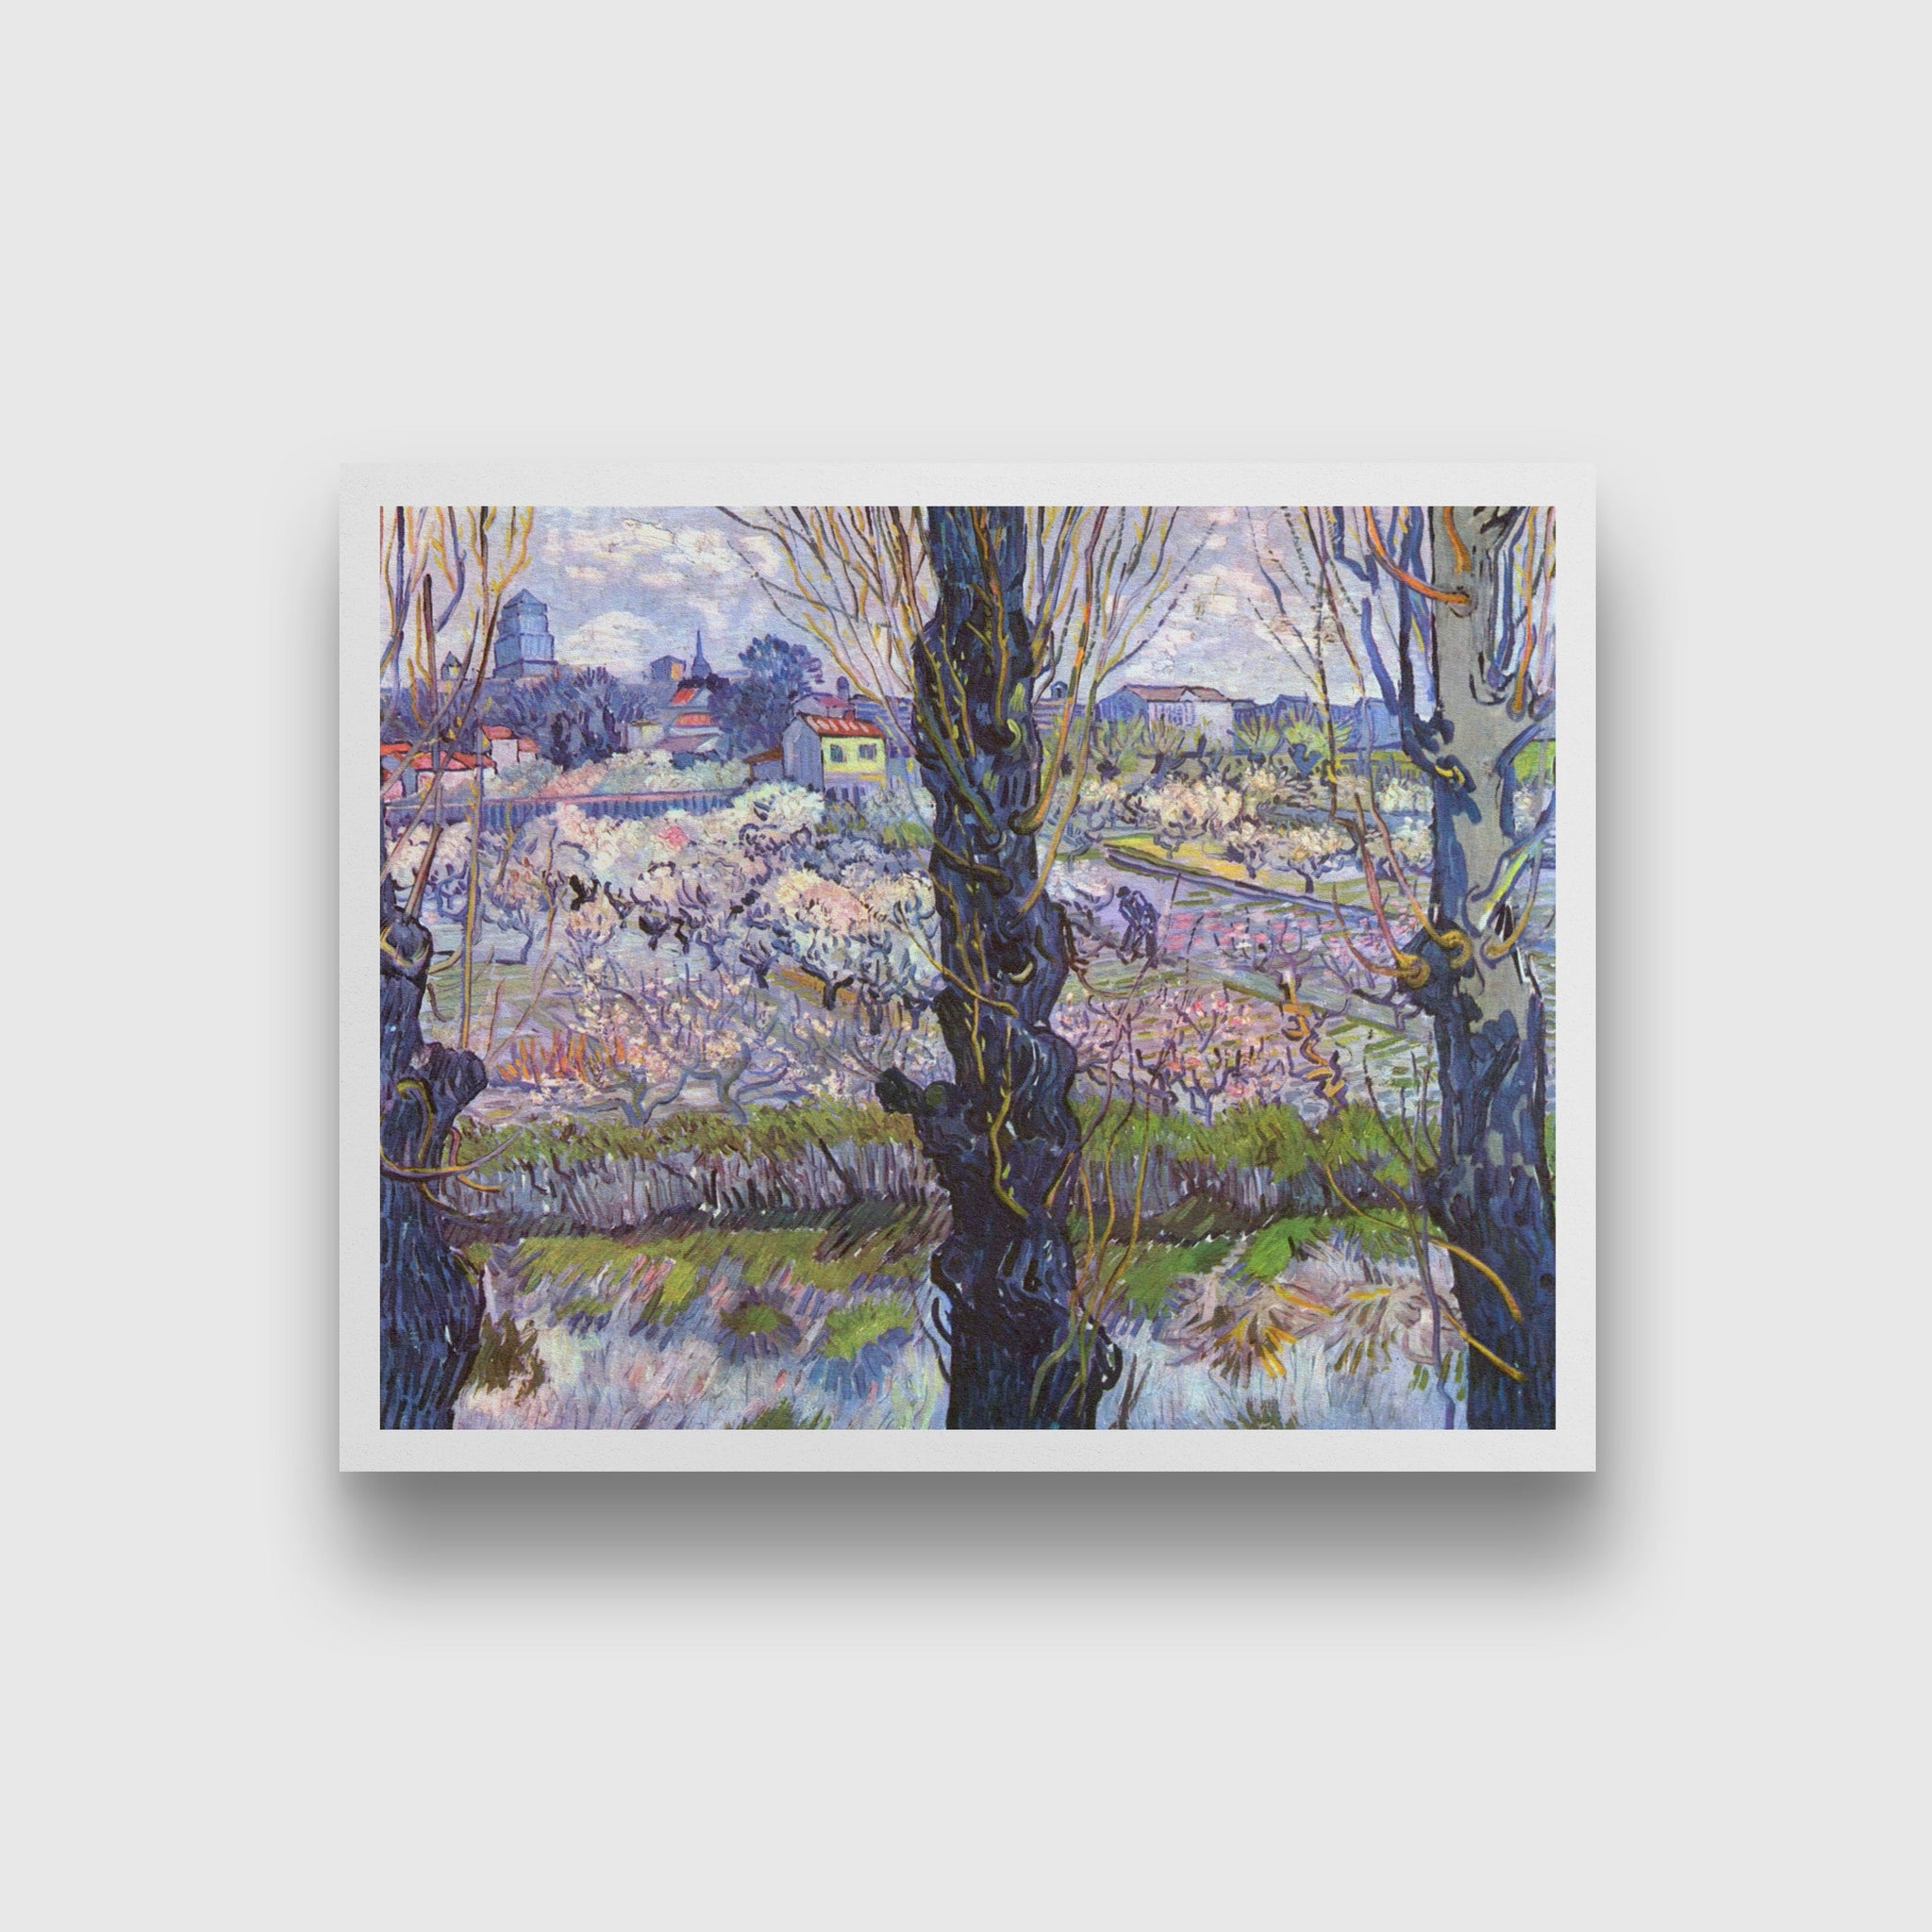 View of Arles, Flowering Orchards (1889) famous landscape painting